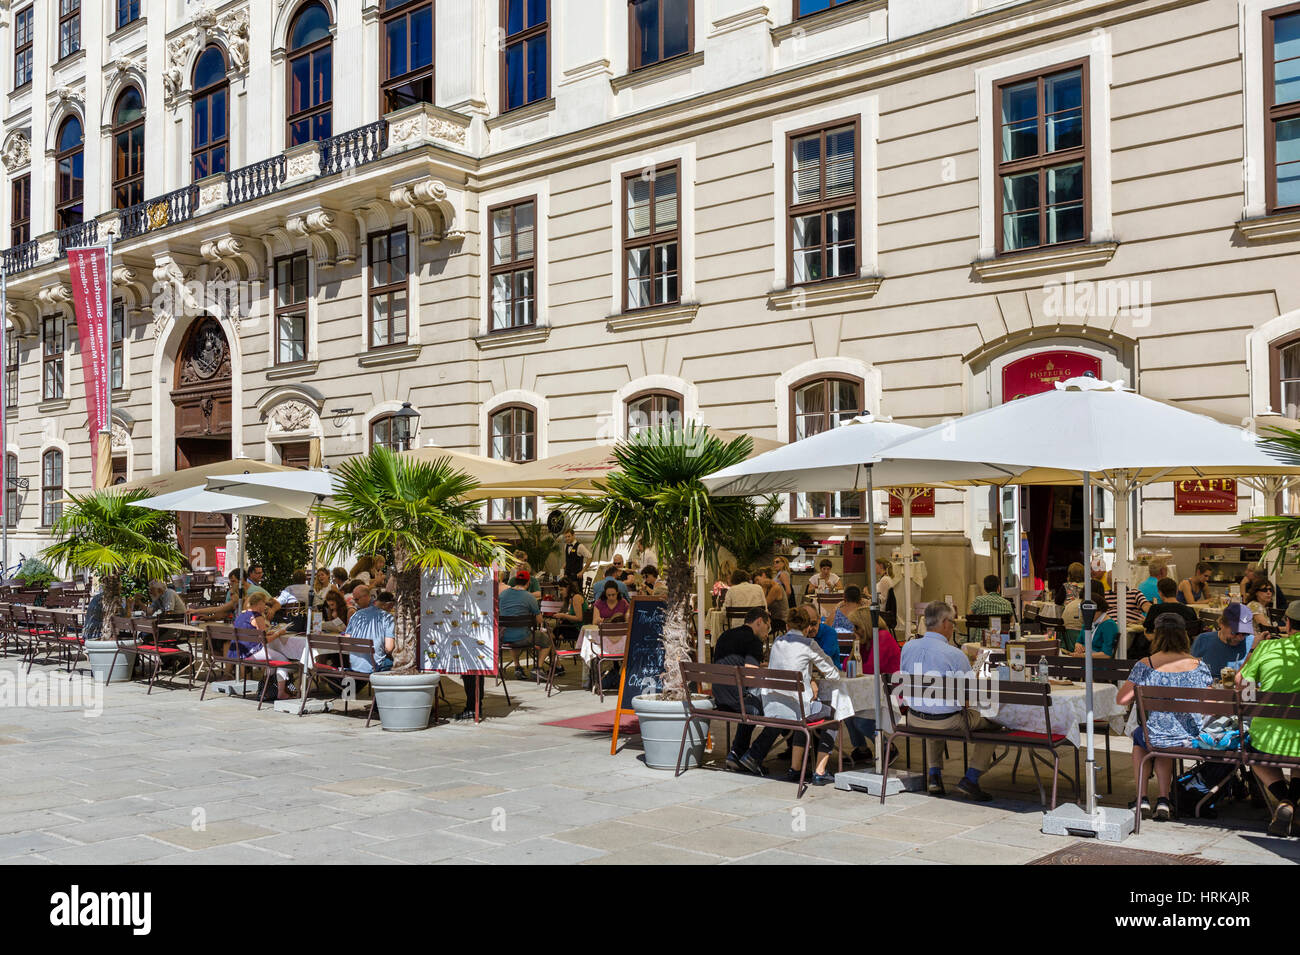 Cafe in front of the Reichskanzleitrakt (Imperial Chancellory Wing) in the Internal Castle Square, Hofburg Palace, Vienna, Austria Stock Photo